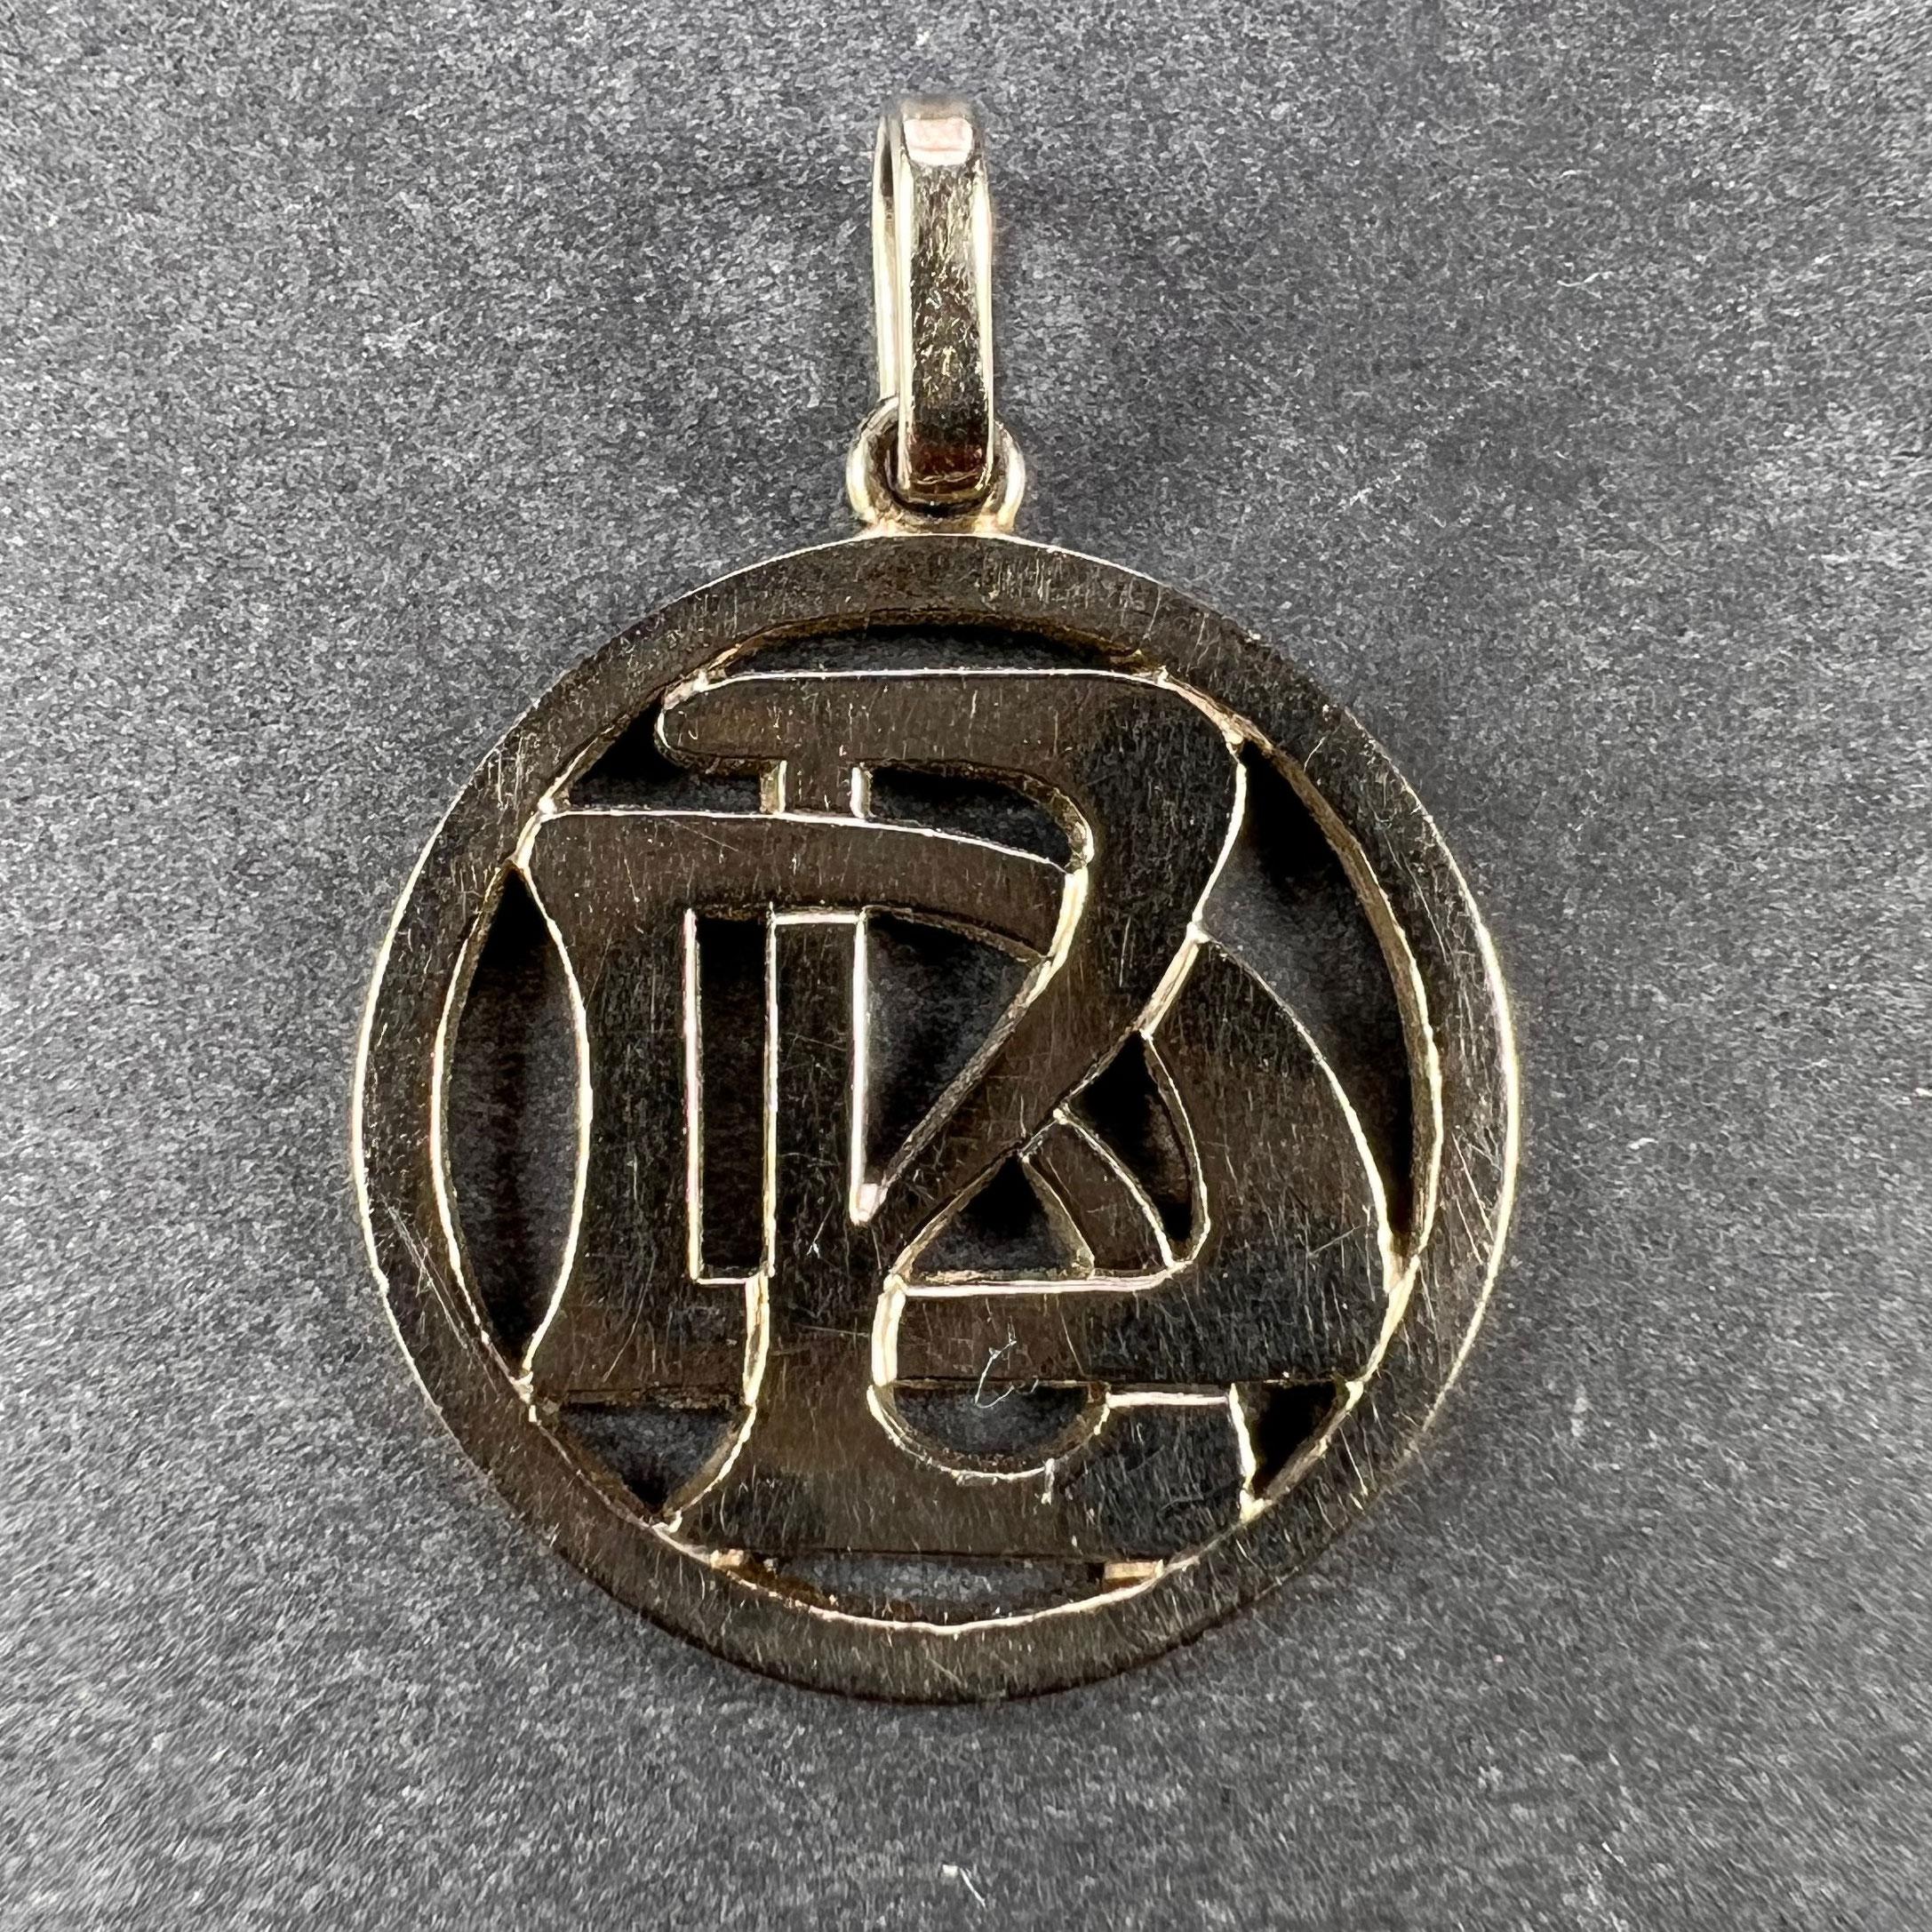 An 18 karat (18K) white gold charm pendant designed as a pierced monogram of the initials BD or DB. Unmarked but tested for 18 karat gold.

Dimensions: 2.2 x 1.9 x 0.1 cm (not including jump ring)
Weight: 3.00 grams 
(Chain not included)